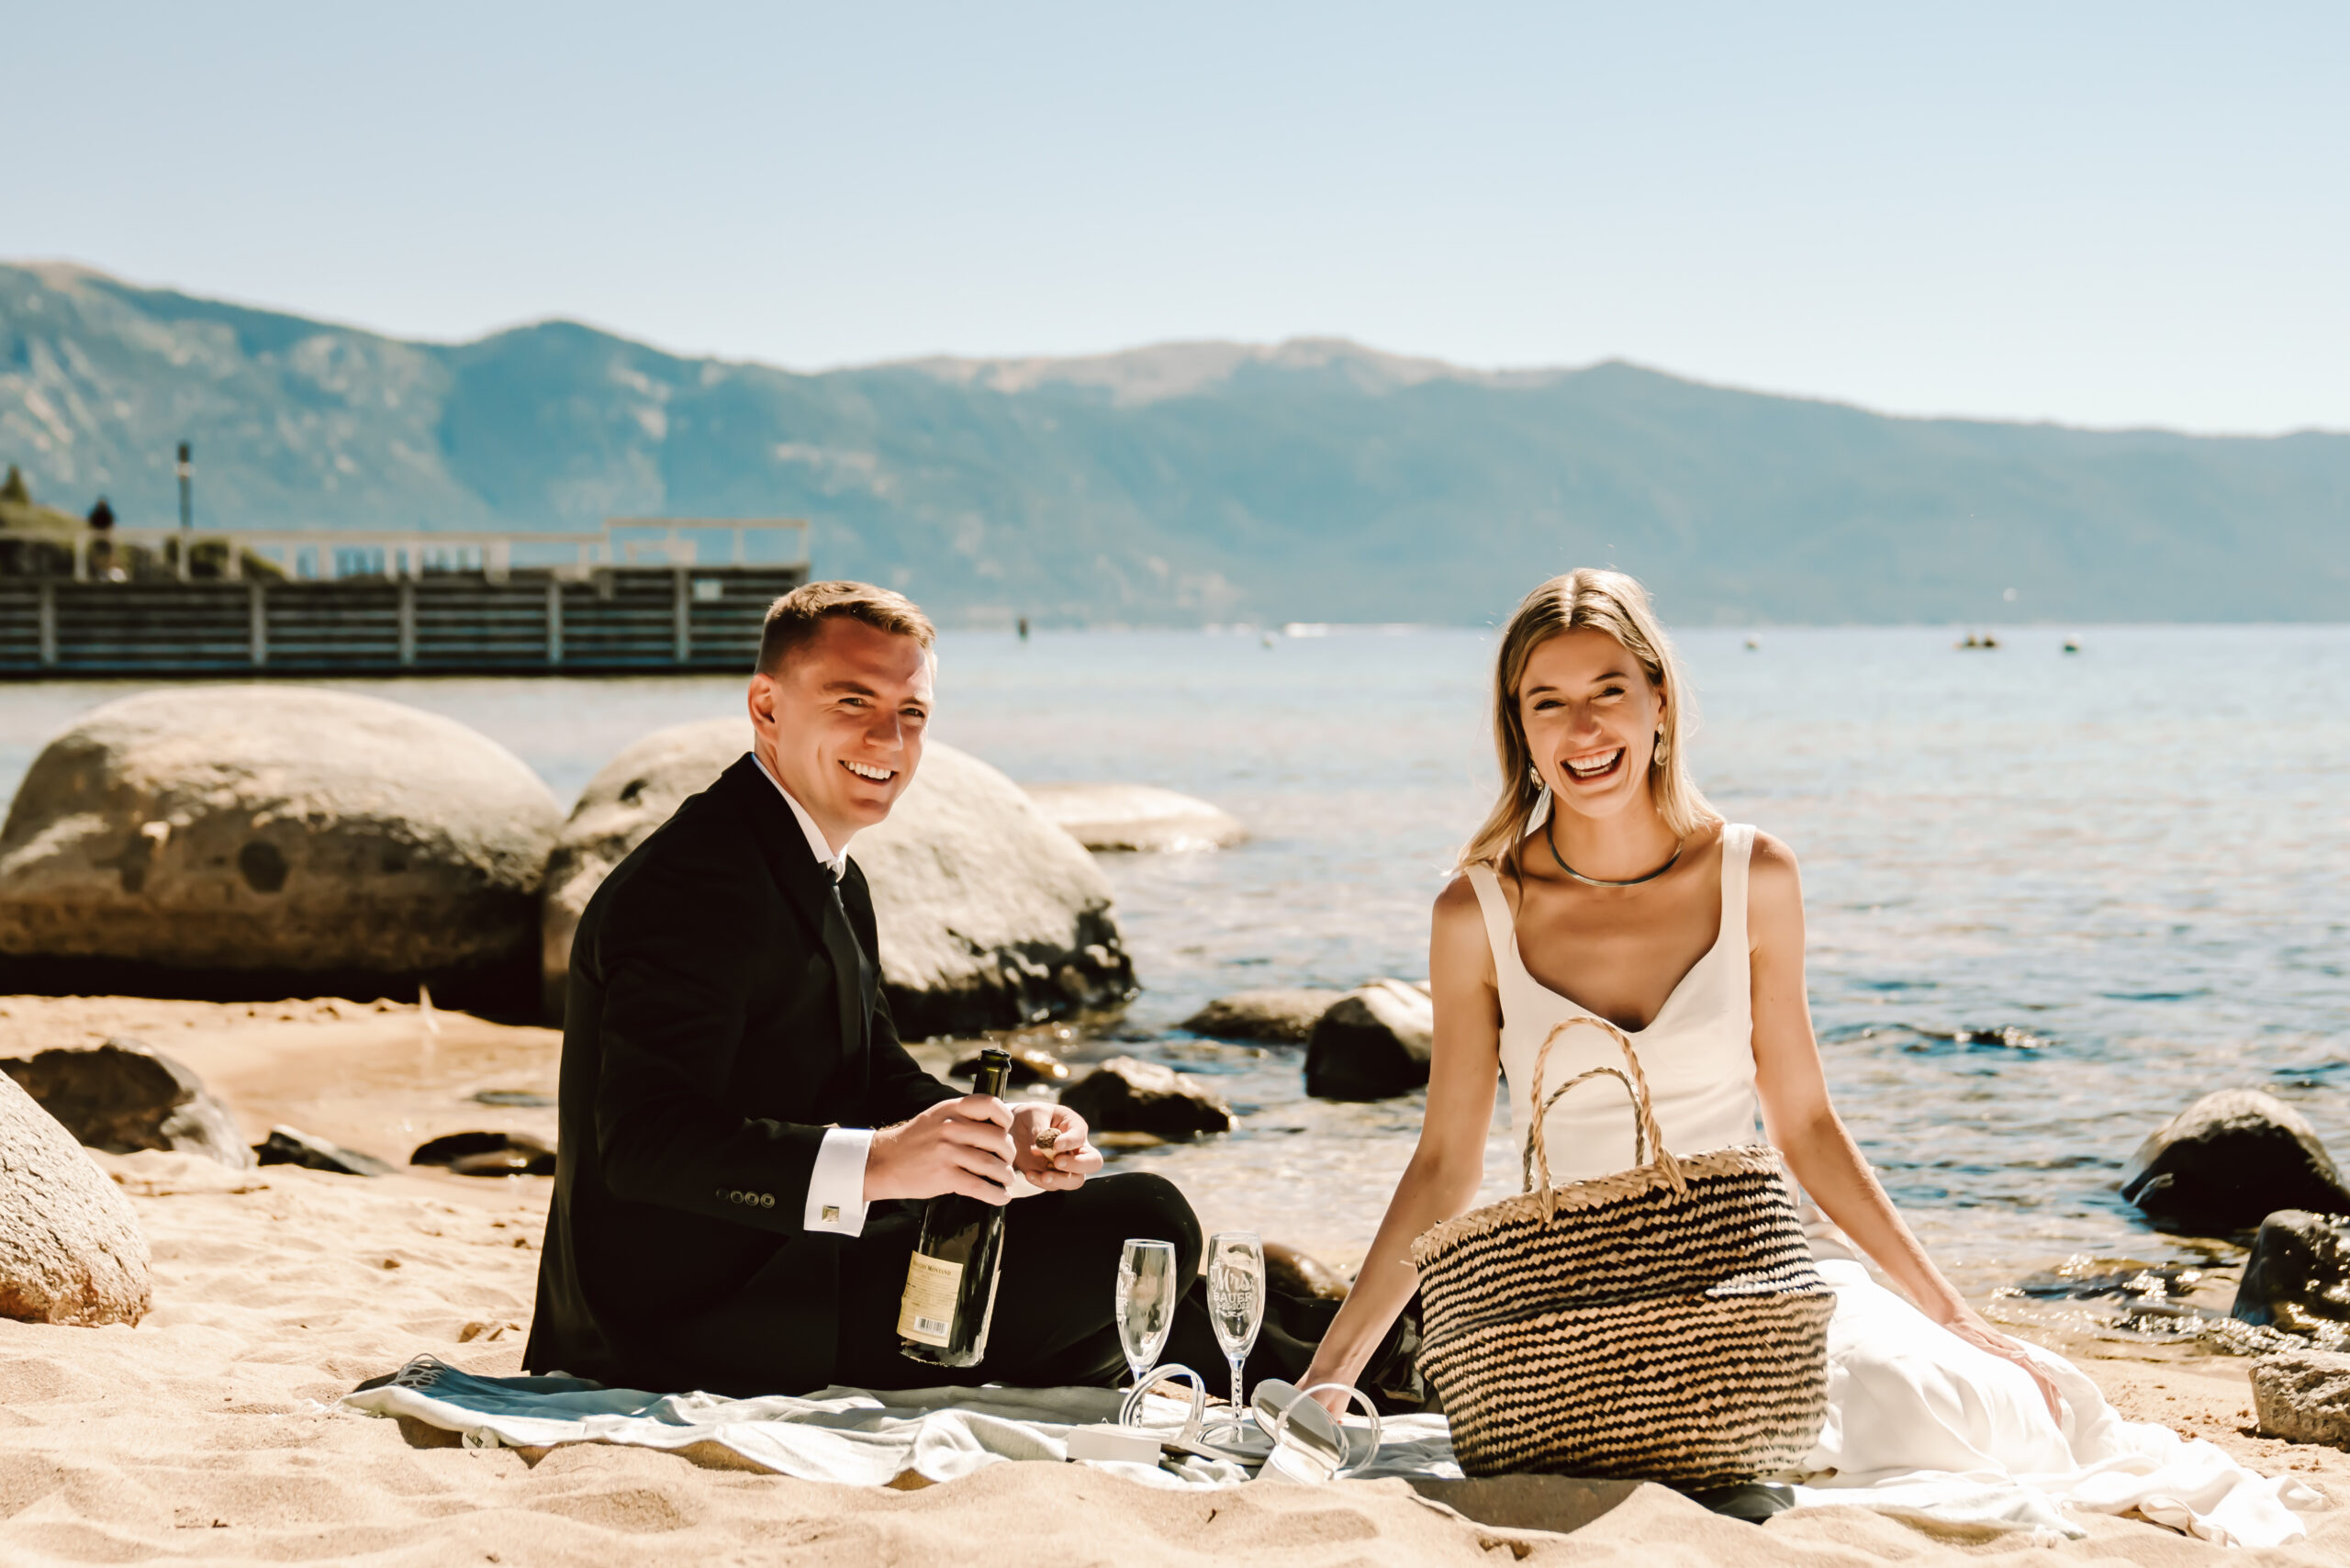 A couple having a picnic on the beach for their elopement day activity